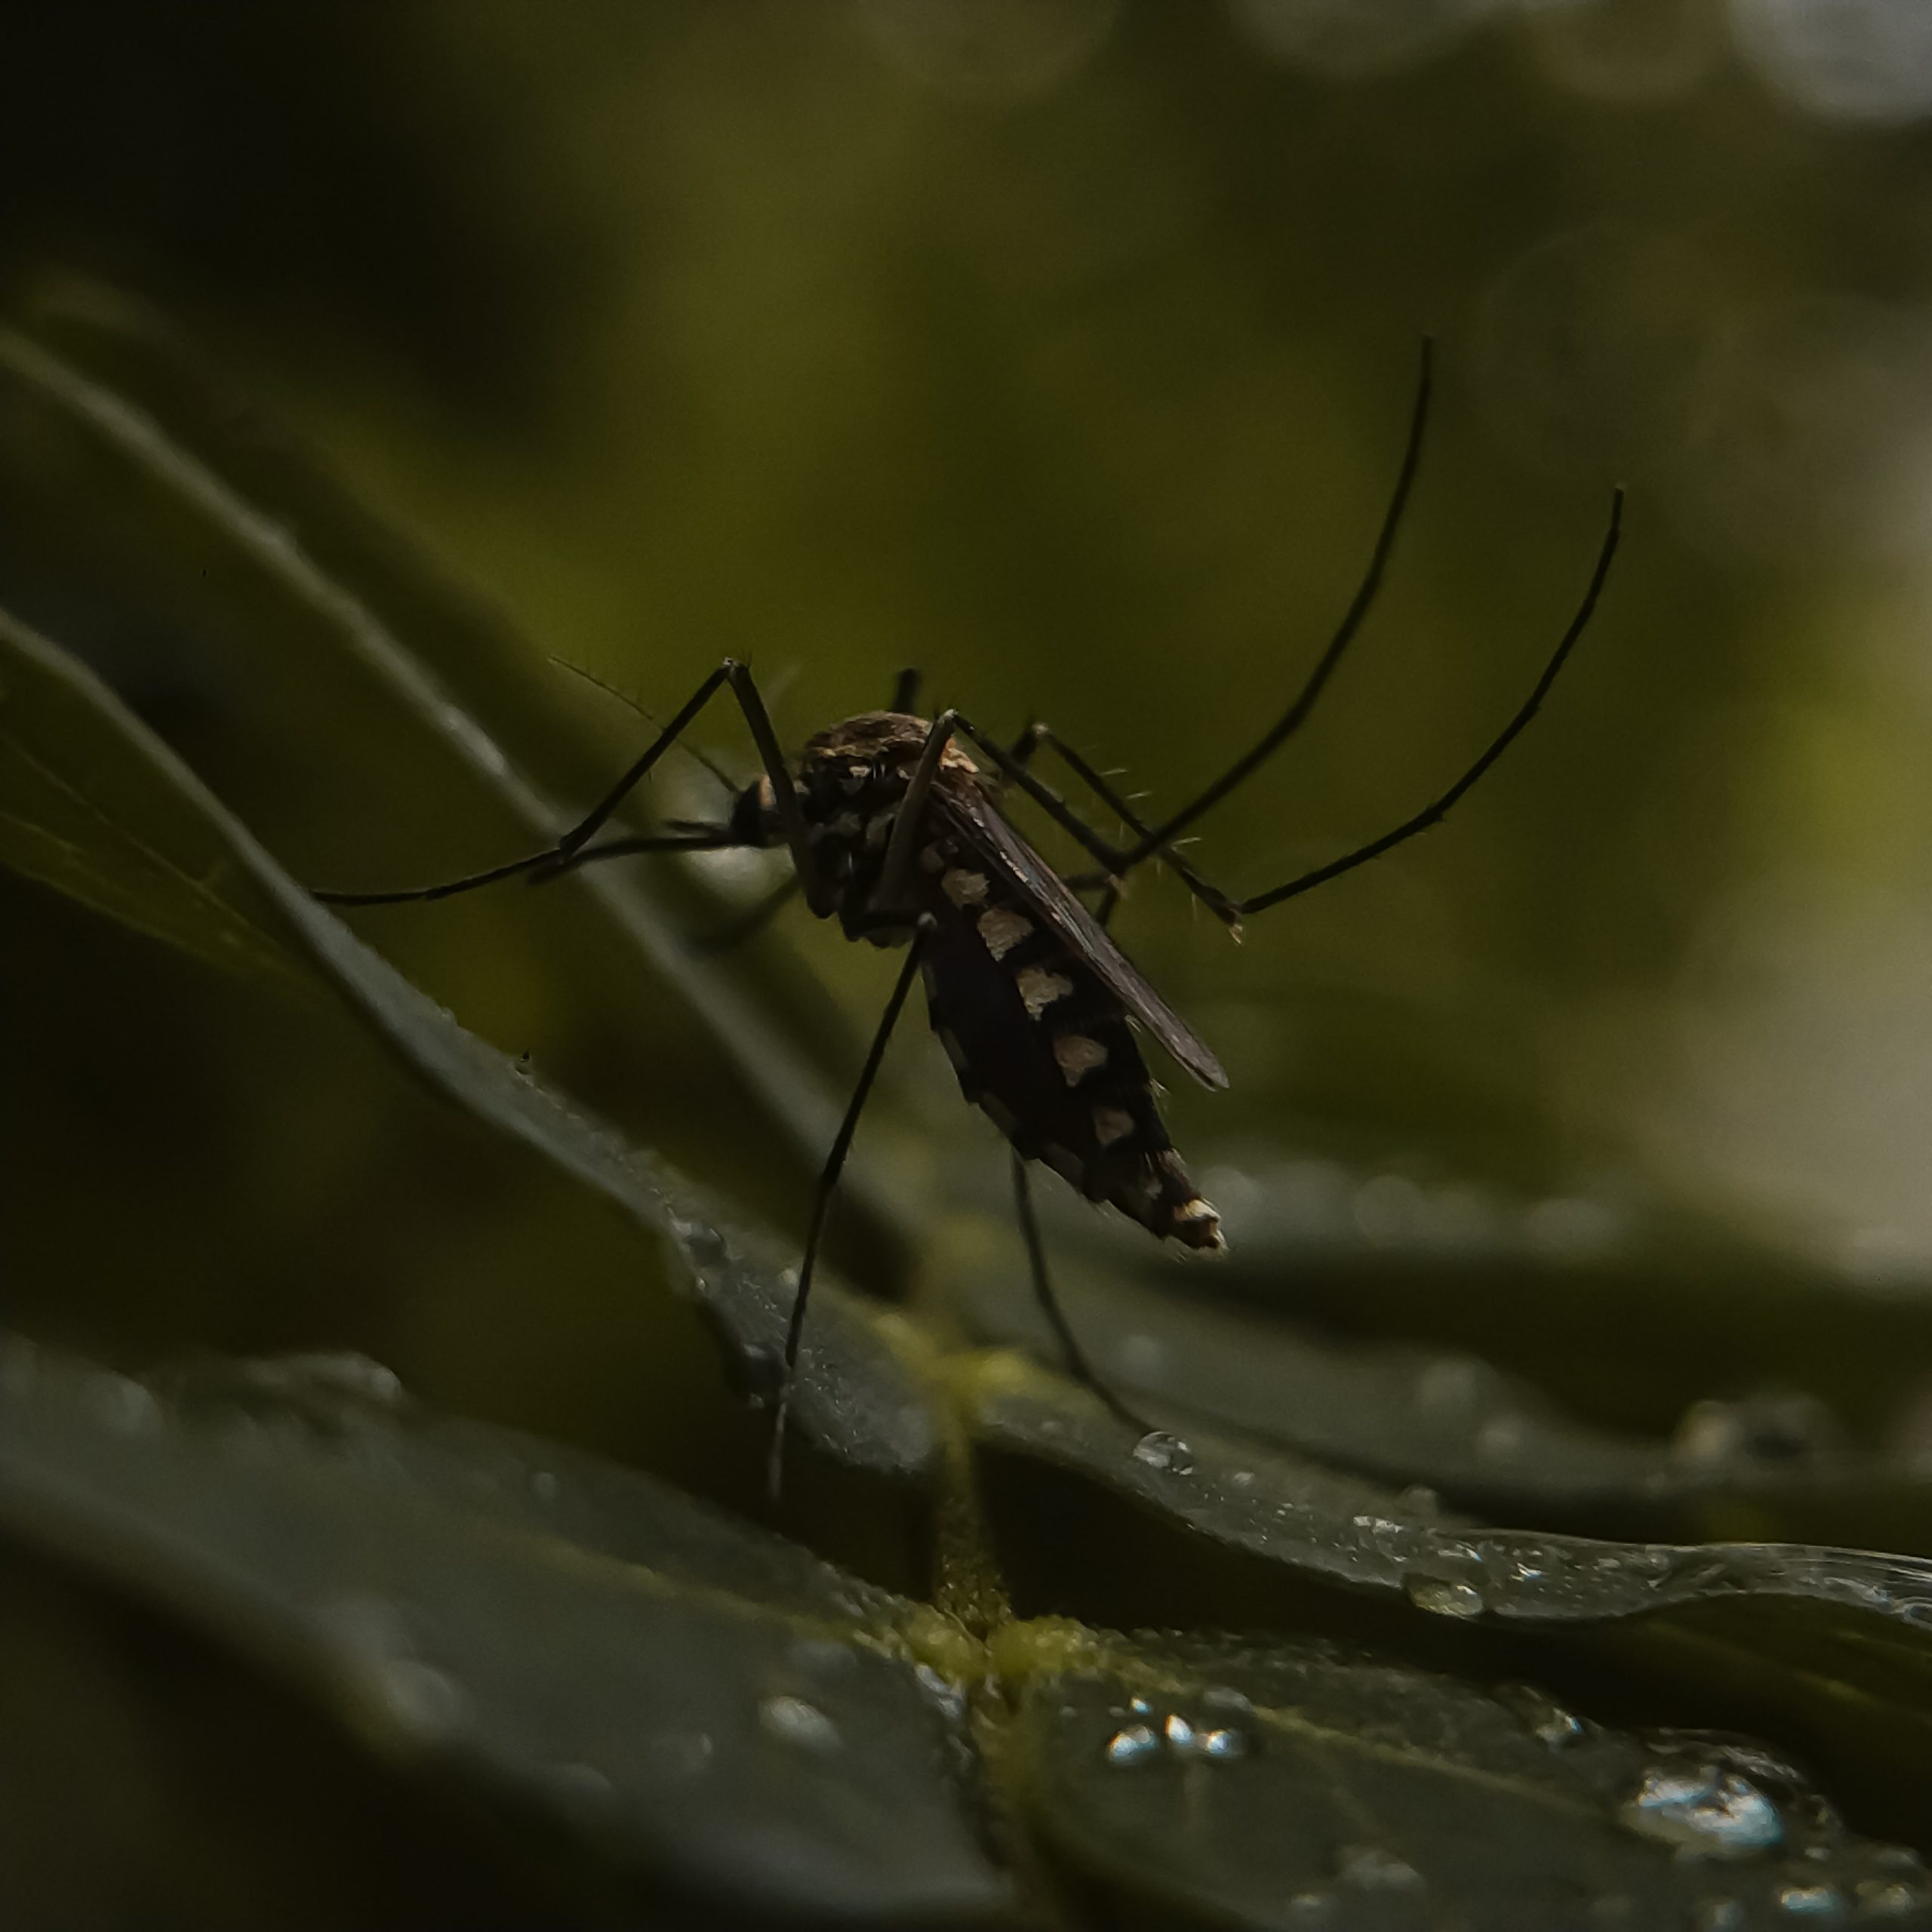 A mosquito on a leaf